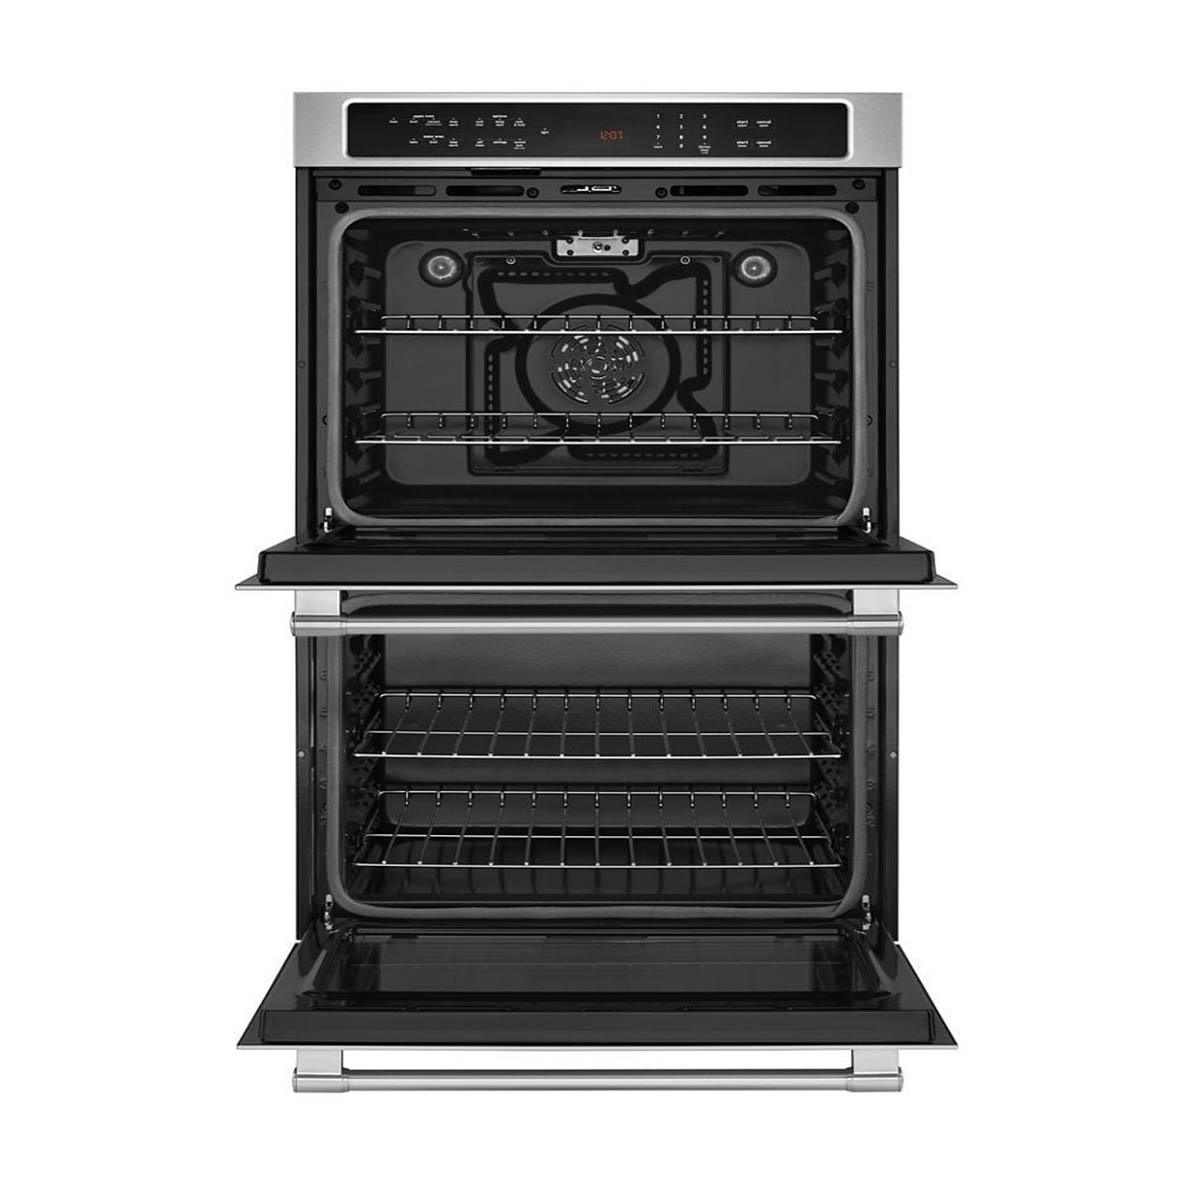 How To Fix The Error Code F1-E3 For Maytag Oven